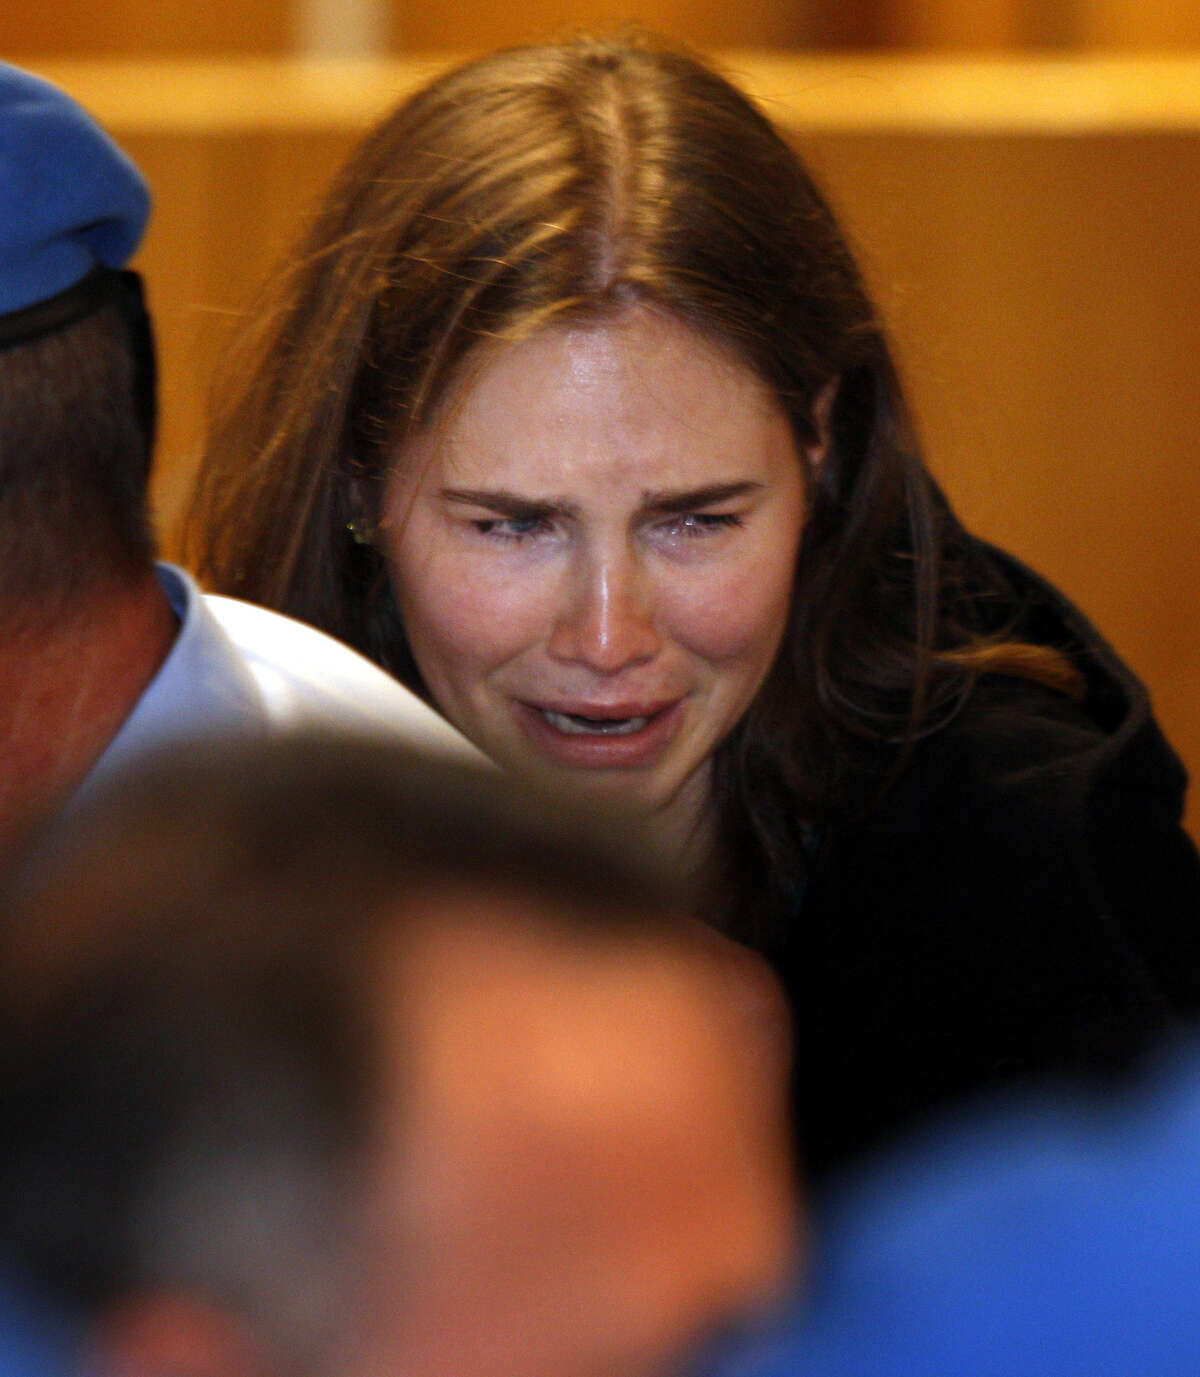 Amanda Knox breaks in tears after hearing the verdict that overturns her conviction and acquits her of murdering her British roommate Meredith Kercher, at the Perugia court, central Italy, Monday, Oct. 3, 2011.  (AP Photo/Pier Paolo Cito)